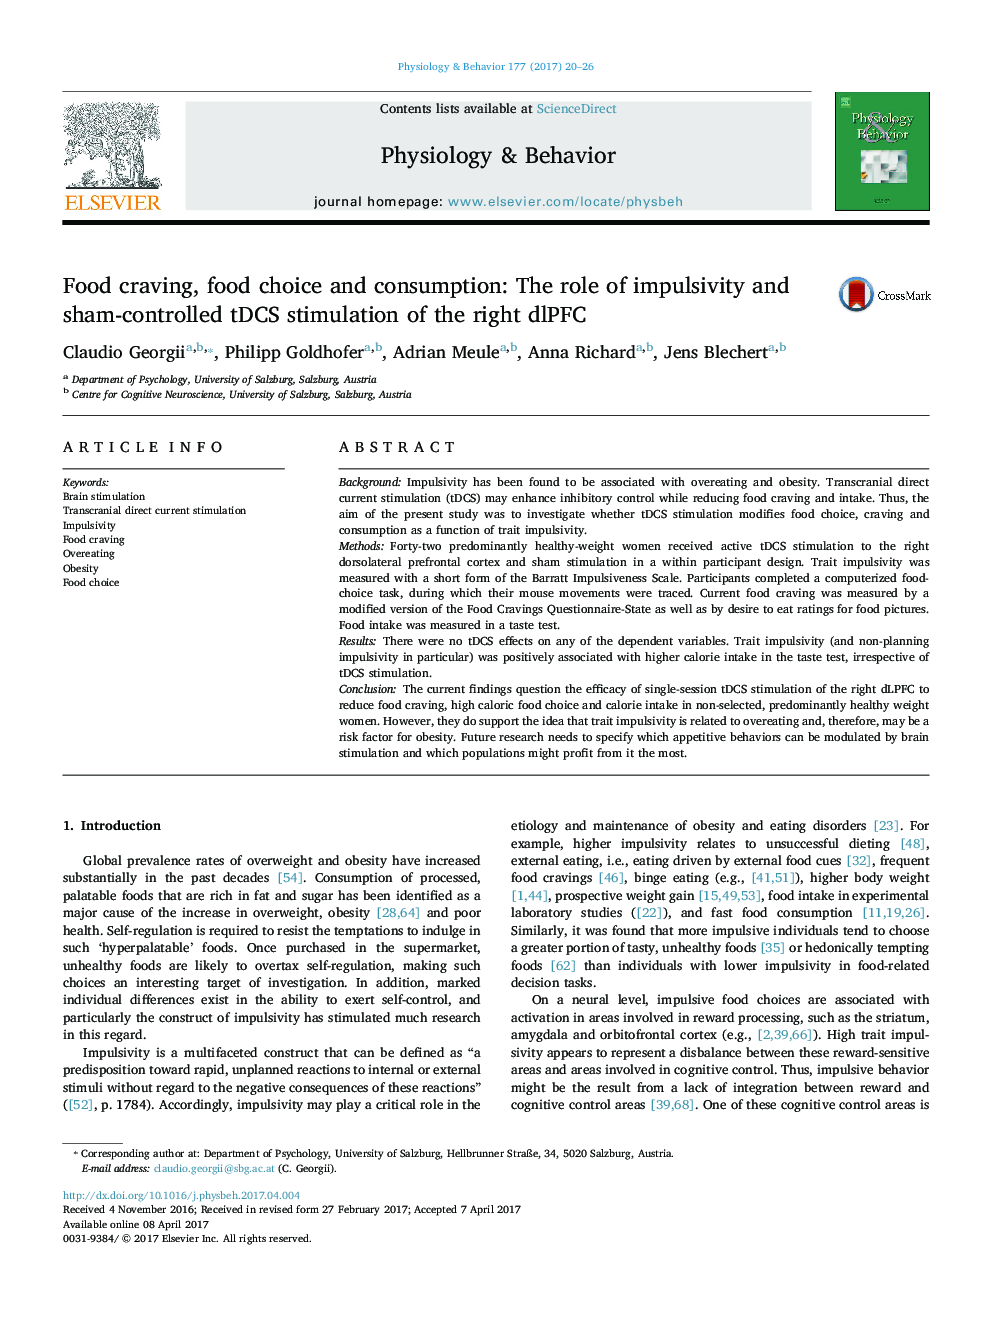 Food craving, food choice and consumption: The role of impulsivity and sham-controlled tDCS stimulation of the right dlPFC